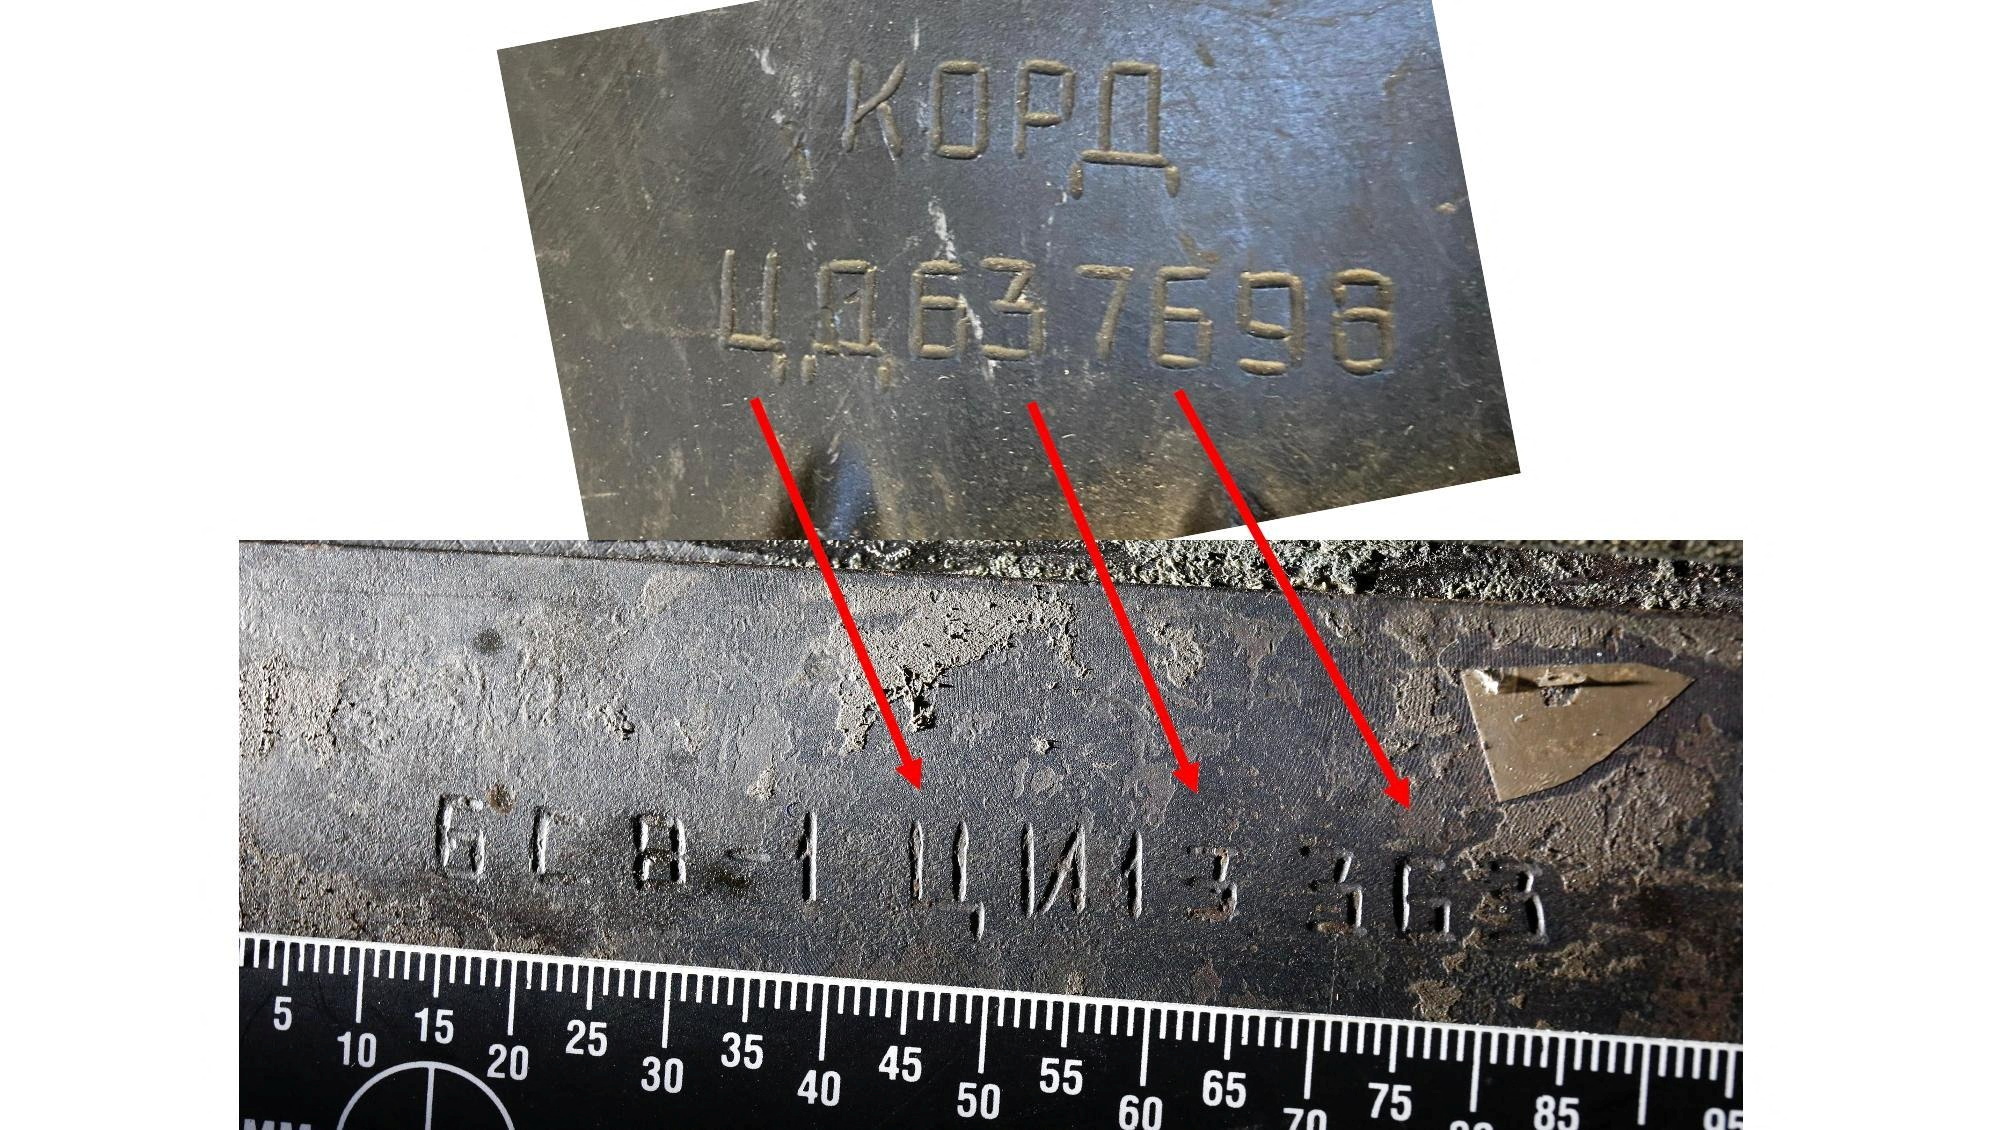 A comparison of etchings on a Kord machine gun seen by Reuters in Kyiv (TOP), and a high-caliber rifle examined in Ukraine 2018 by research group Conflict Armament Research, which determined the weapon was produced at the Degtyarev plant. The group said the similarity between the characters is 